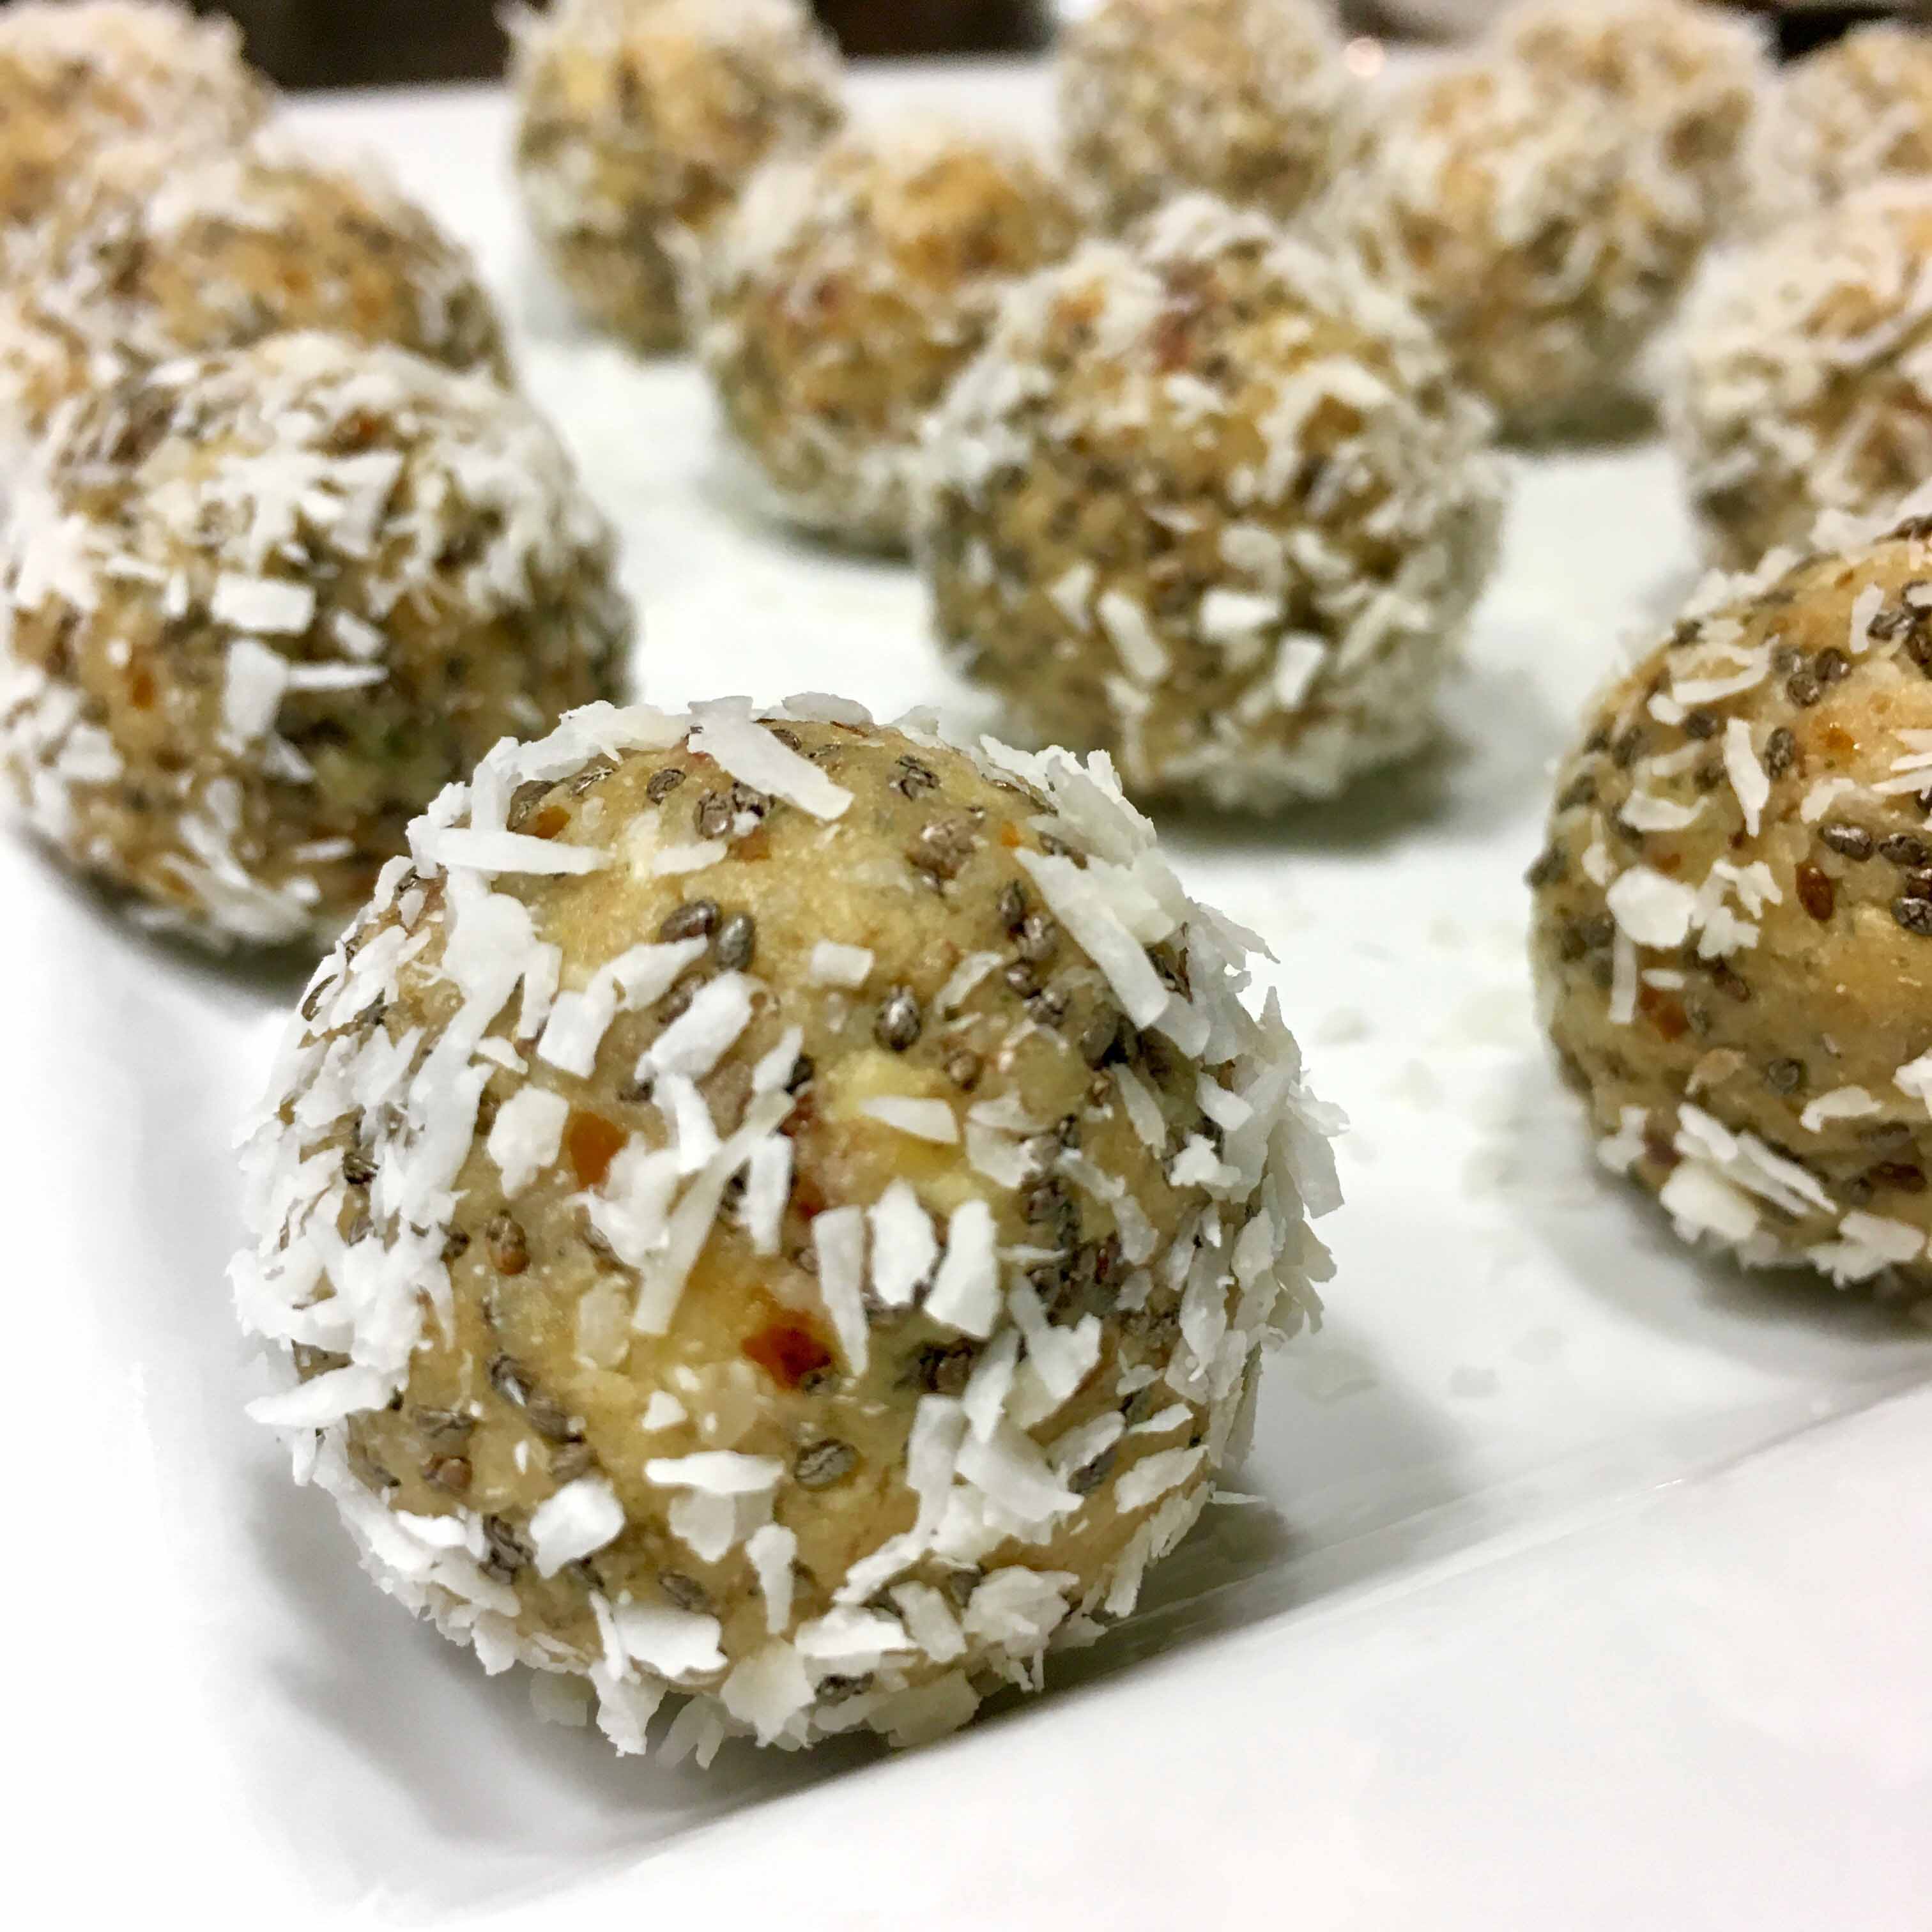 Coconut Date Protein Bites. (Photo by Emma Poling)